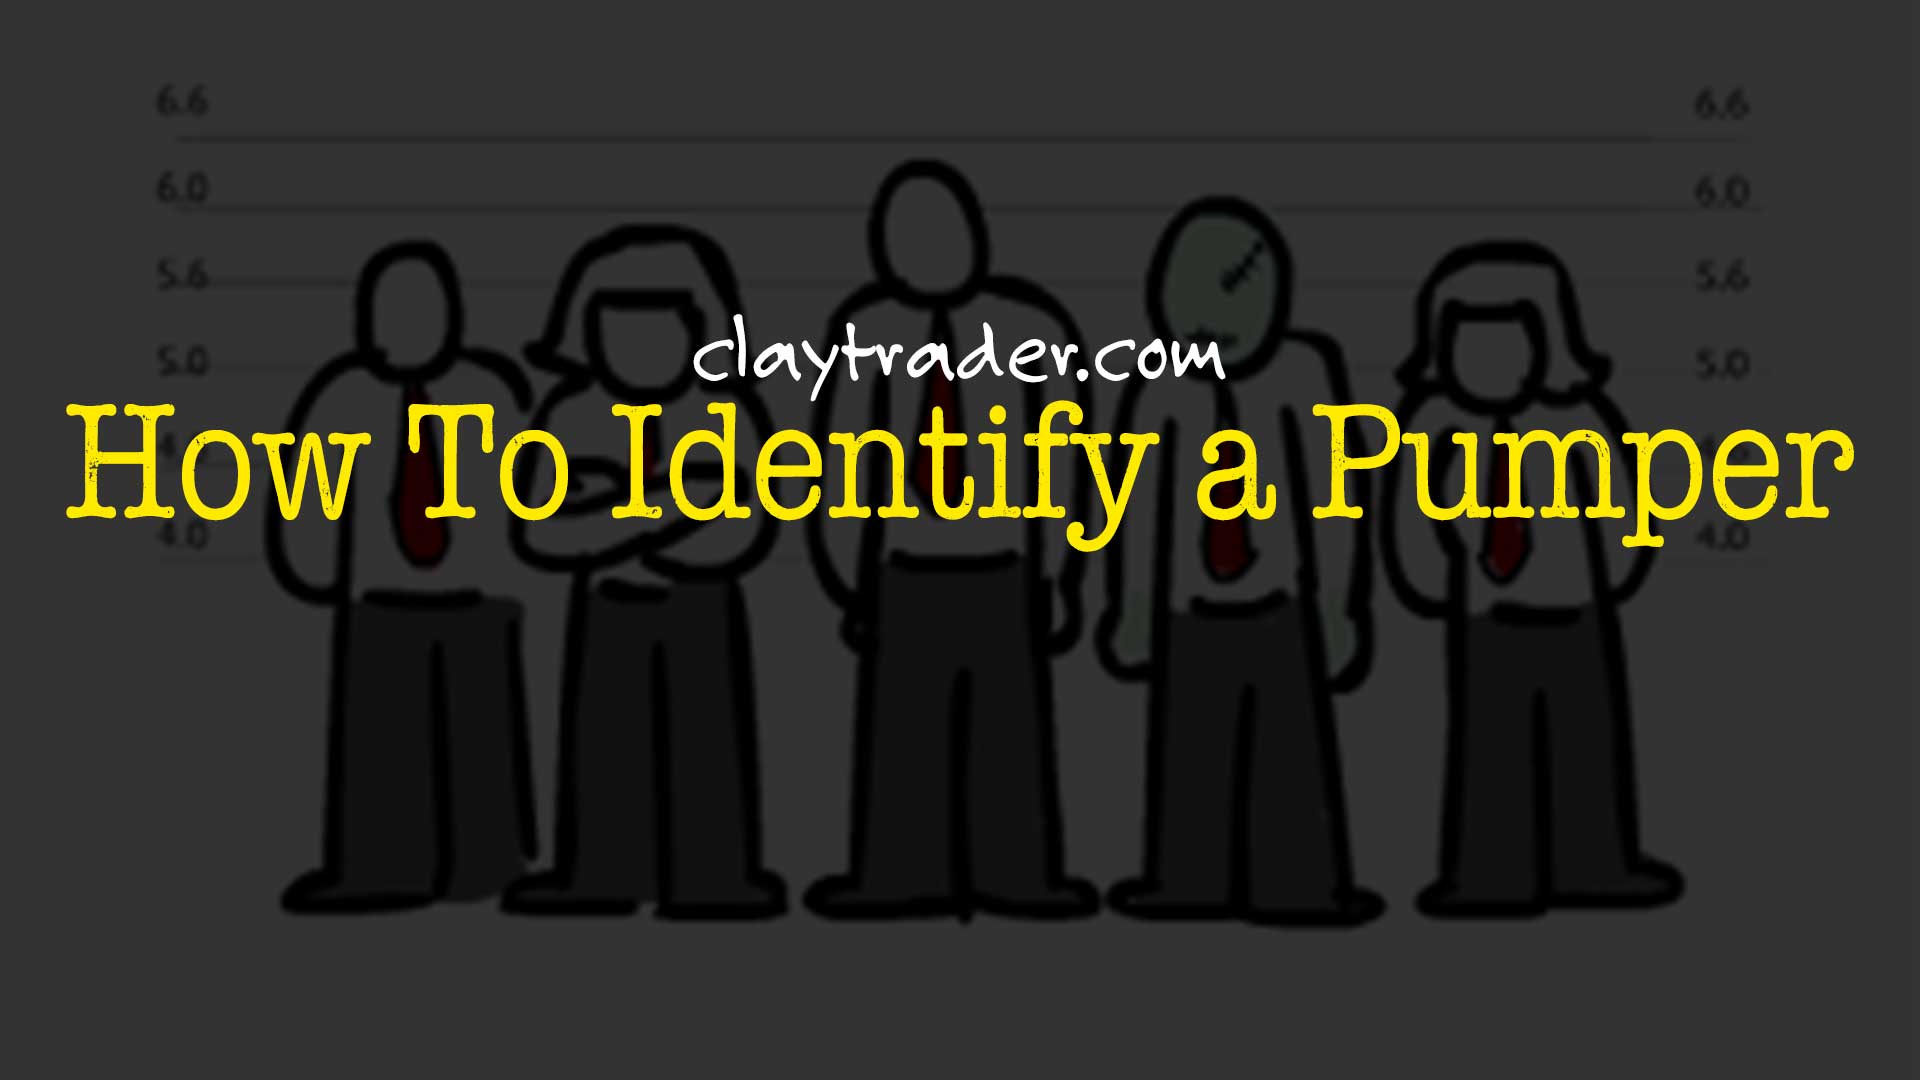 How To Identify a Pumper